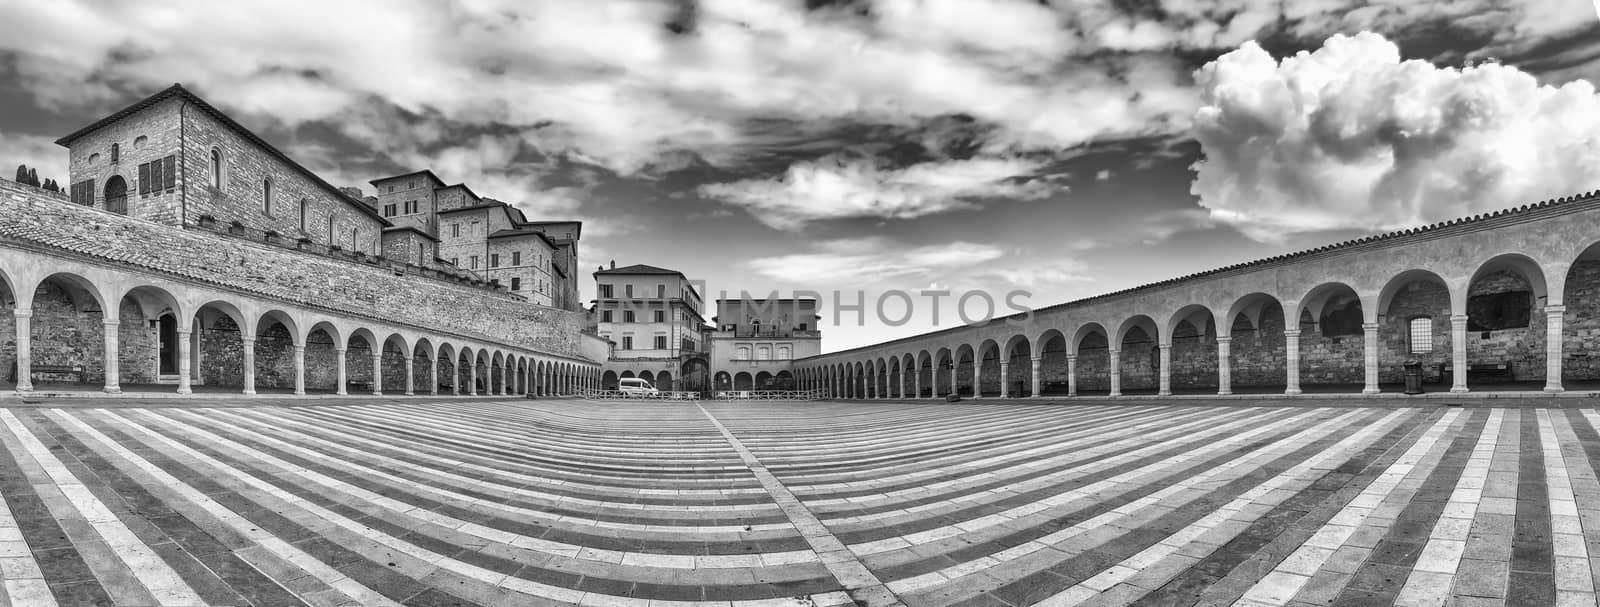 Lower plaza of the Basilica of Saint Francis, Assisi, Italy by marcorubino